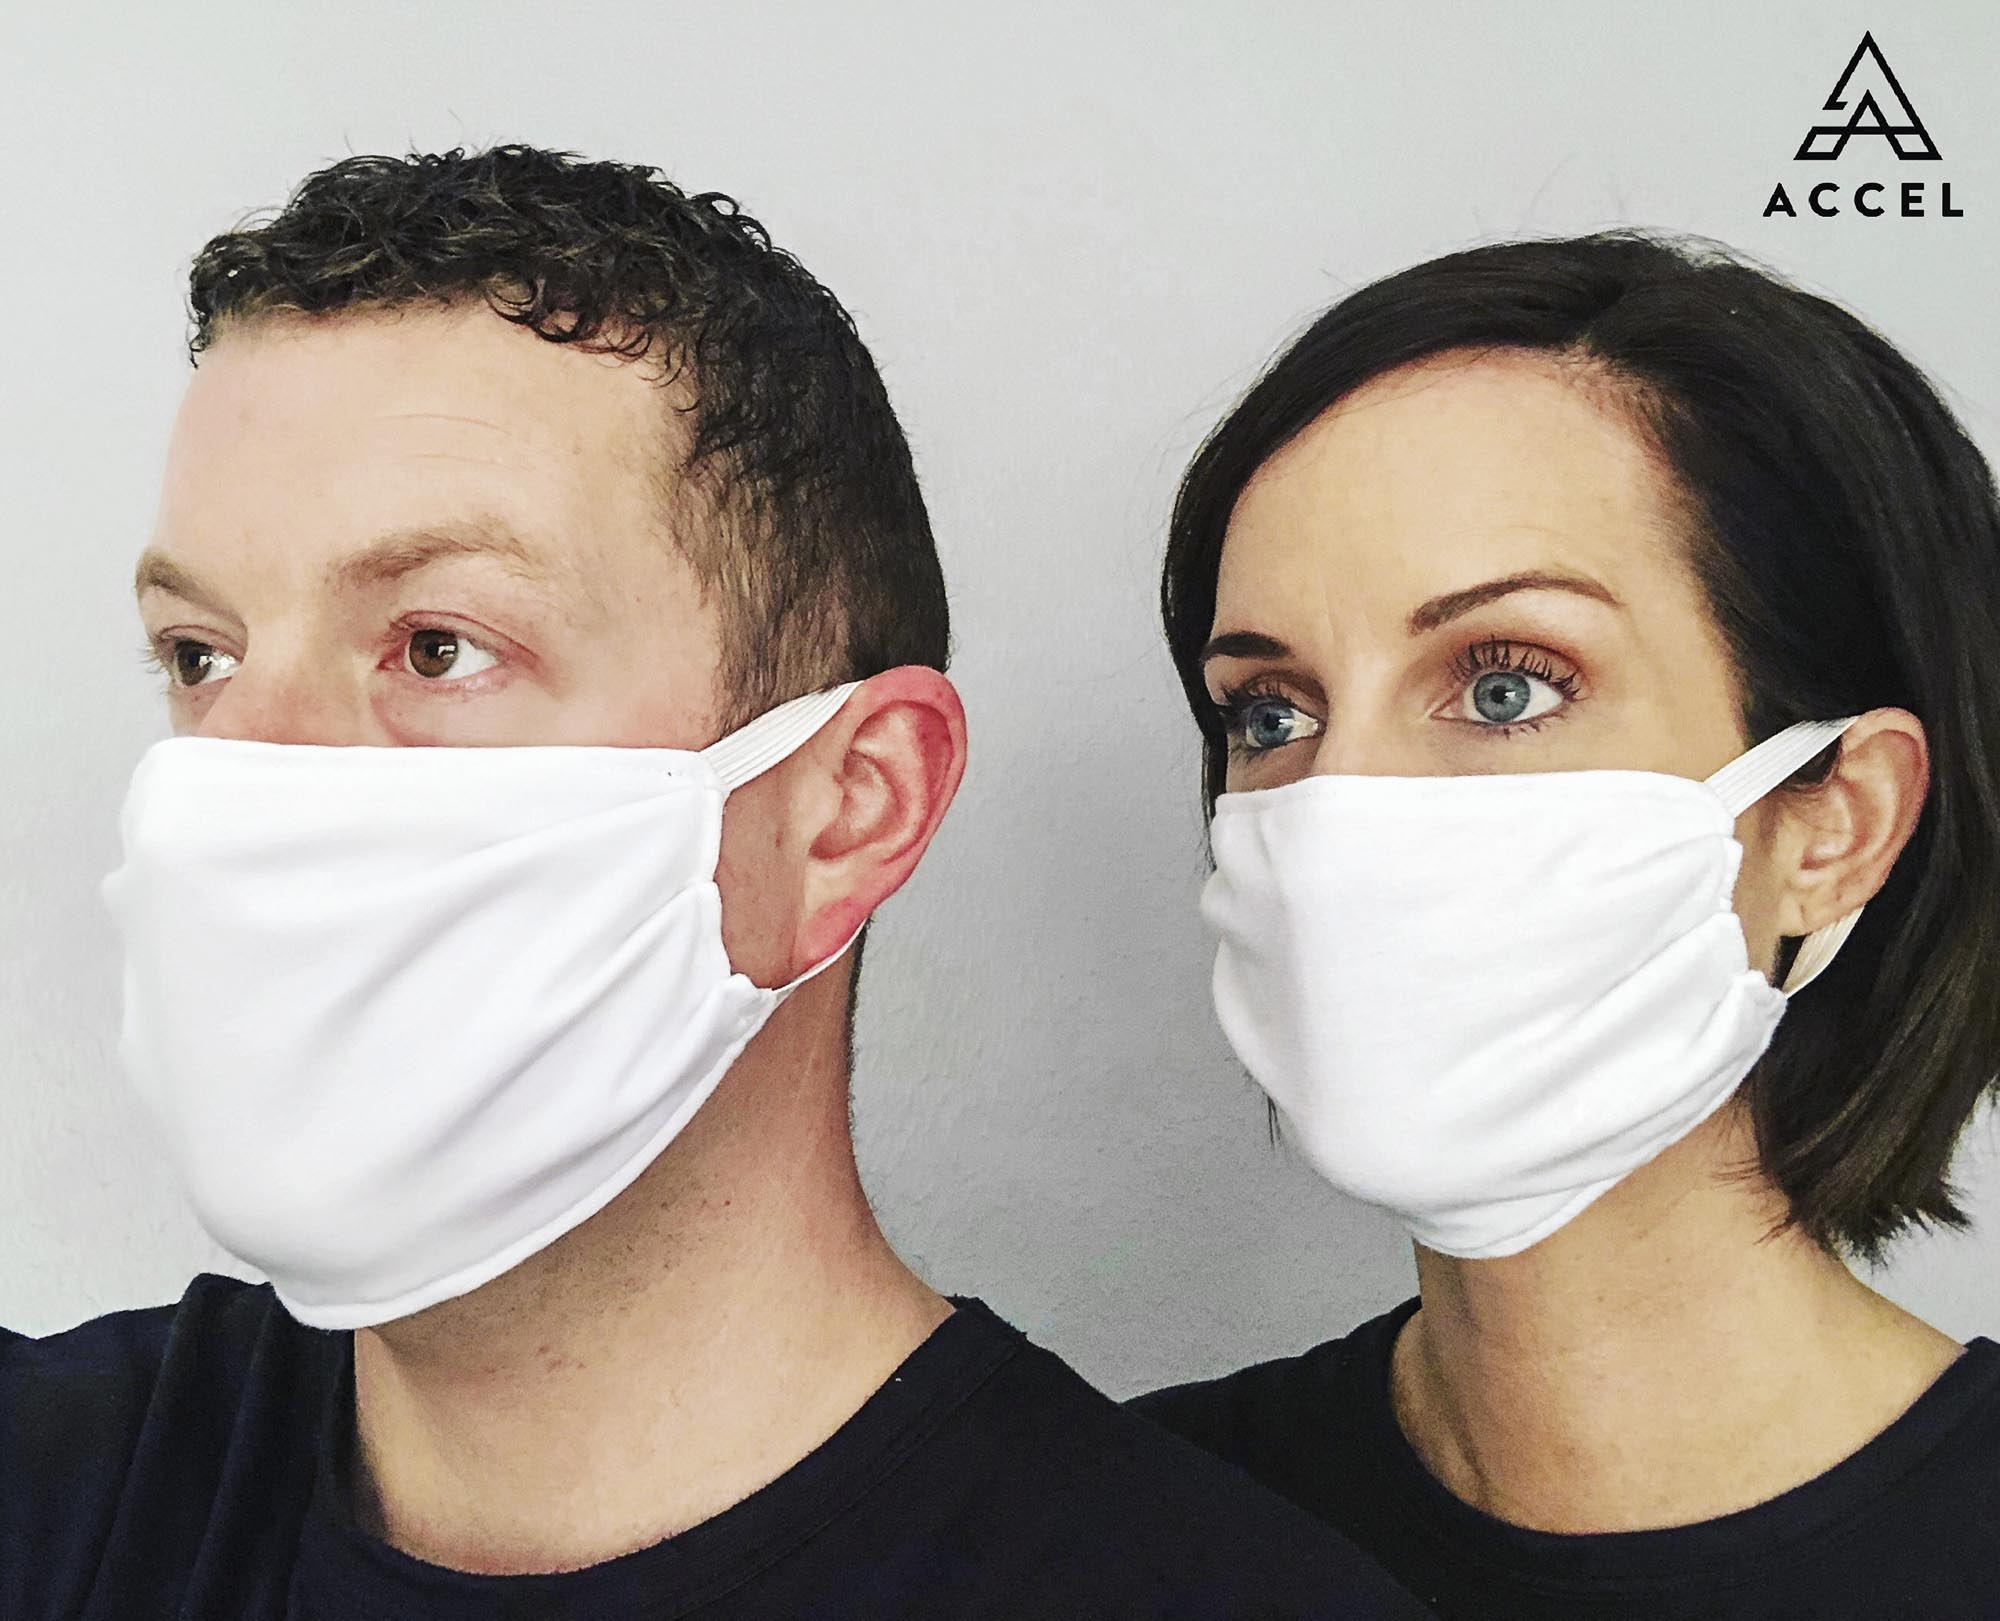 Kyle Eddings, left,Megan, right both wear a solid white facemask made my accel